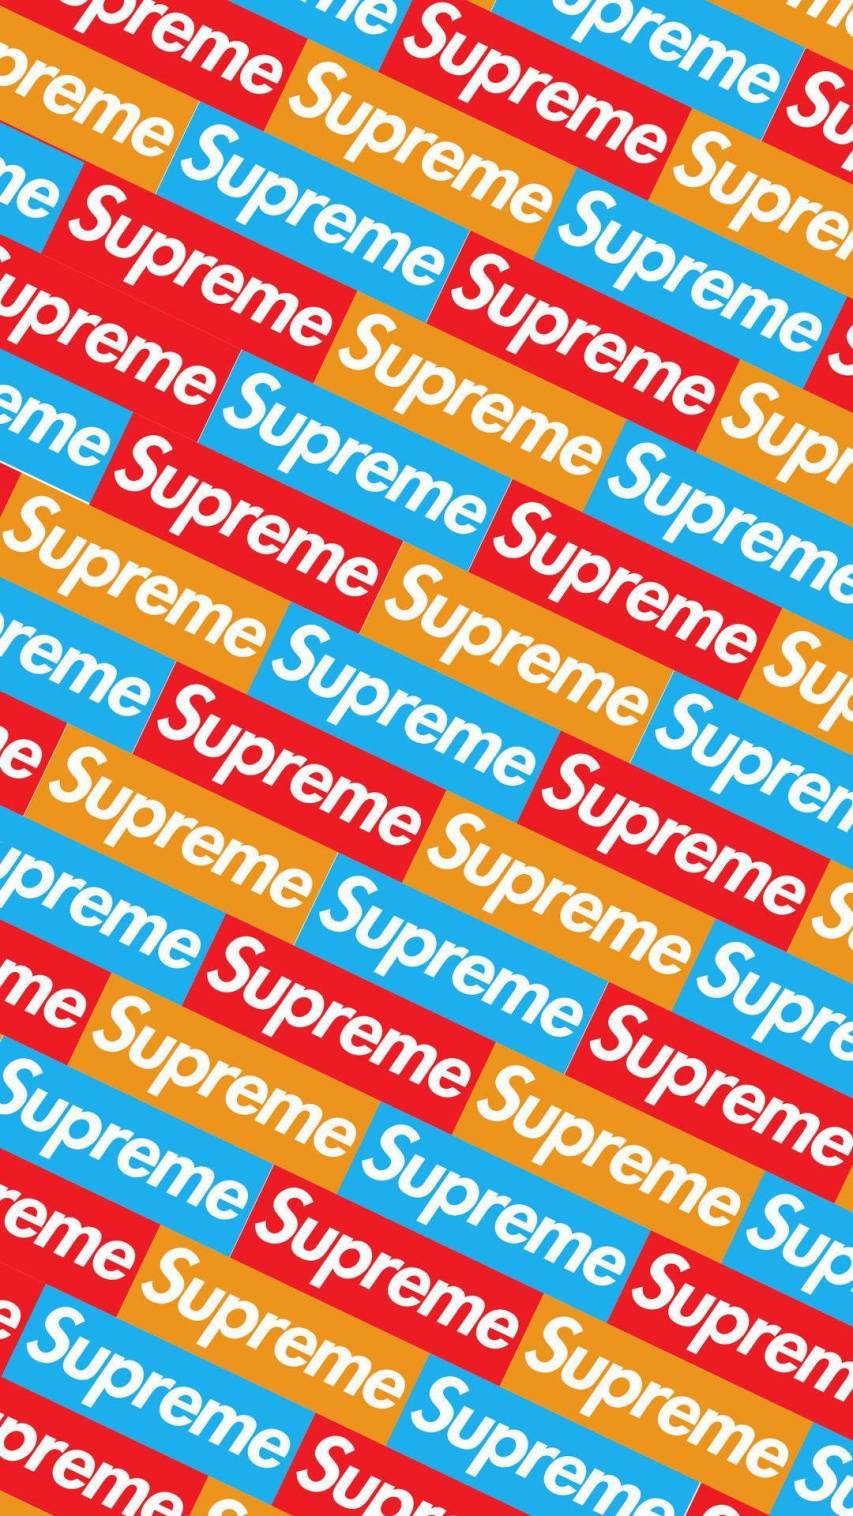 Supreme wallpaper for android phone and iphone - Supreme